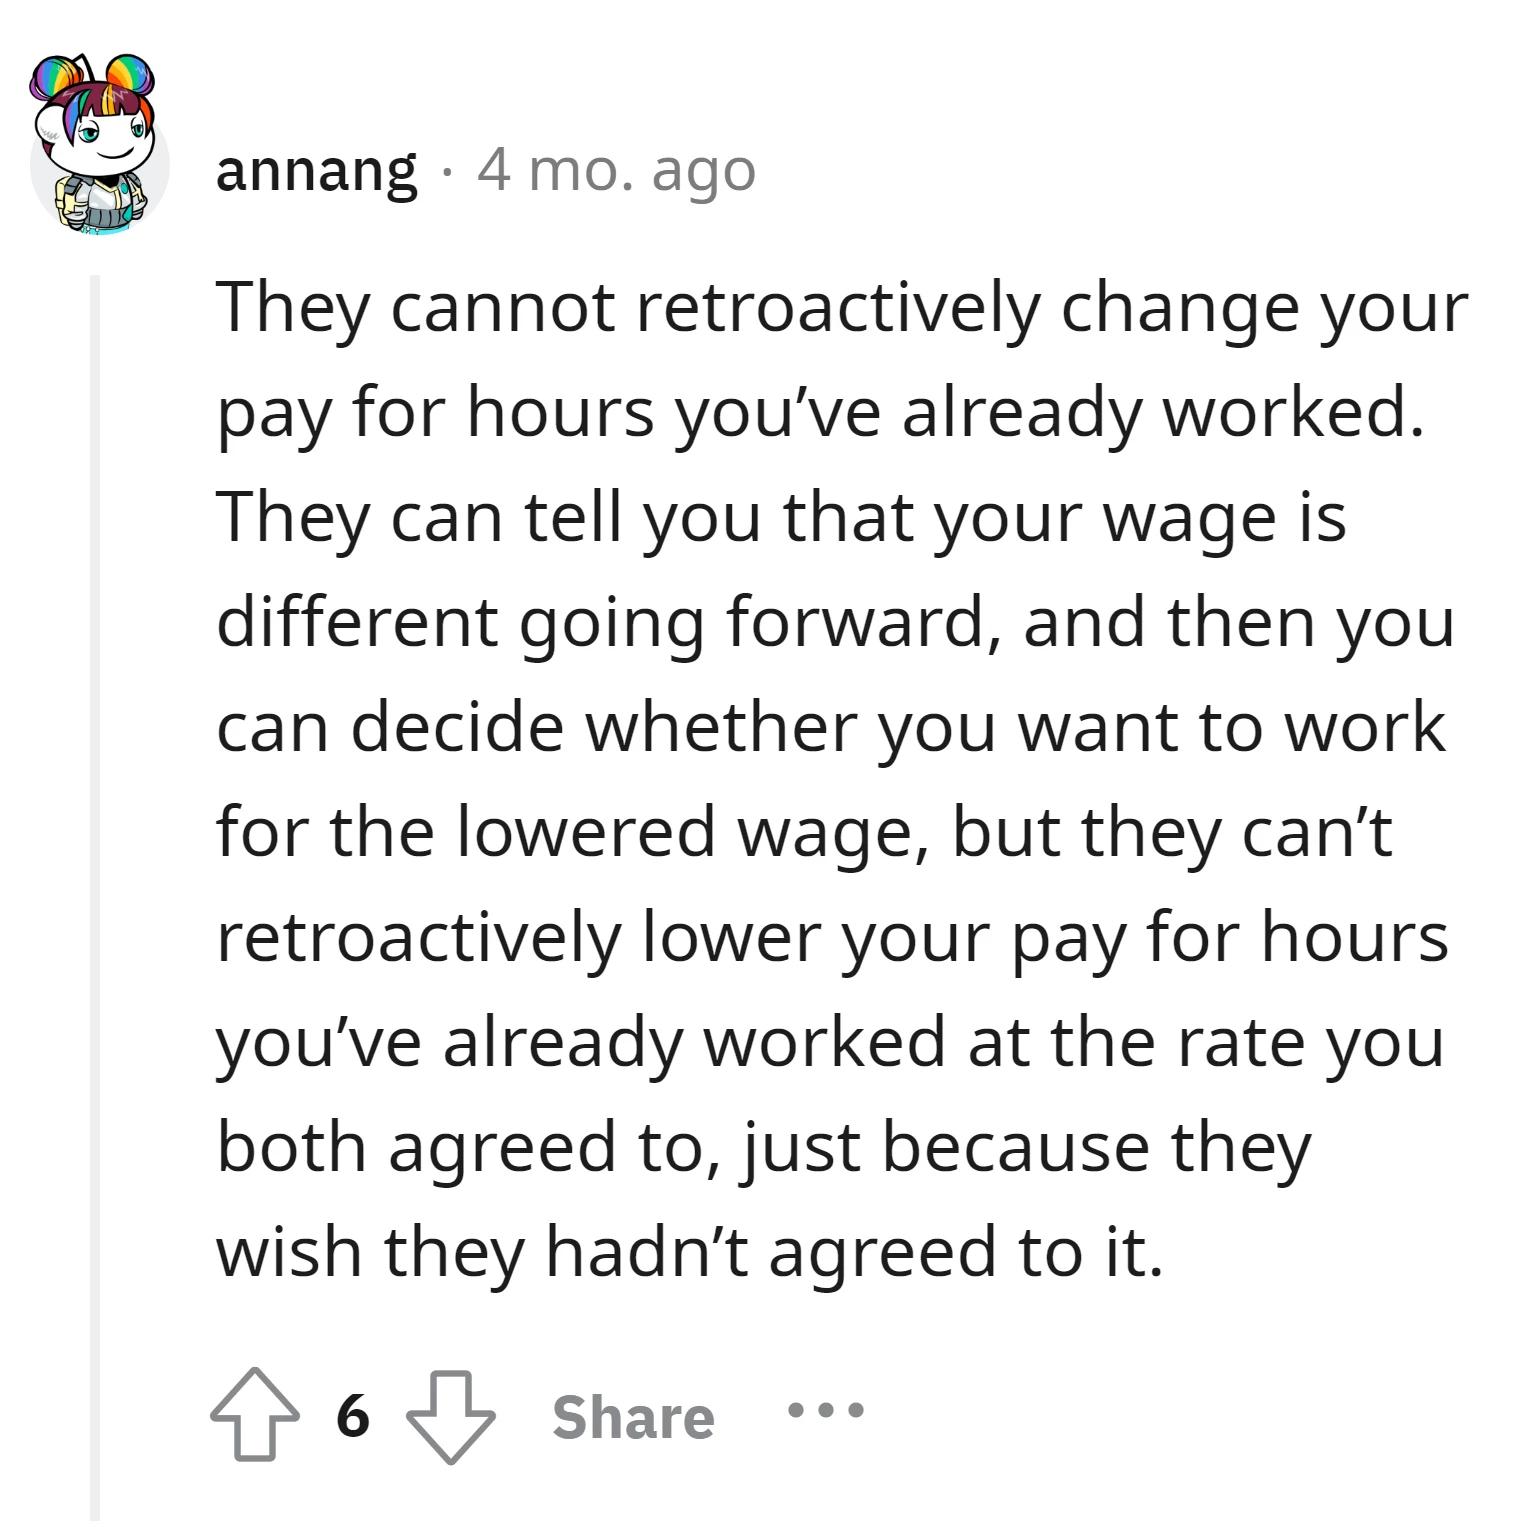 Employers cannot retroactively change the pay for hours already worked at the agreed-upon rate